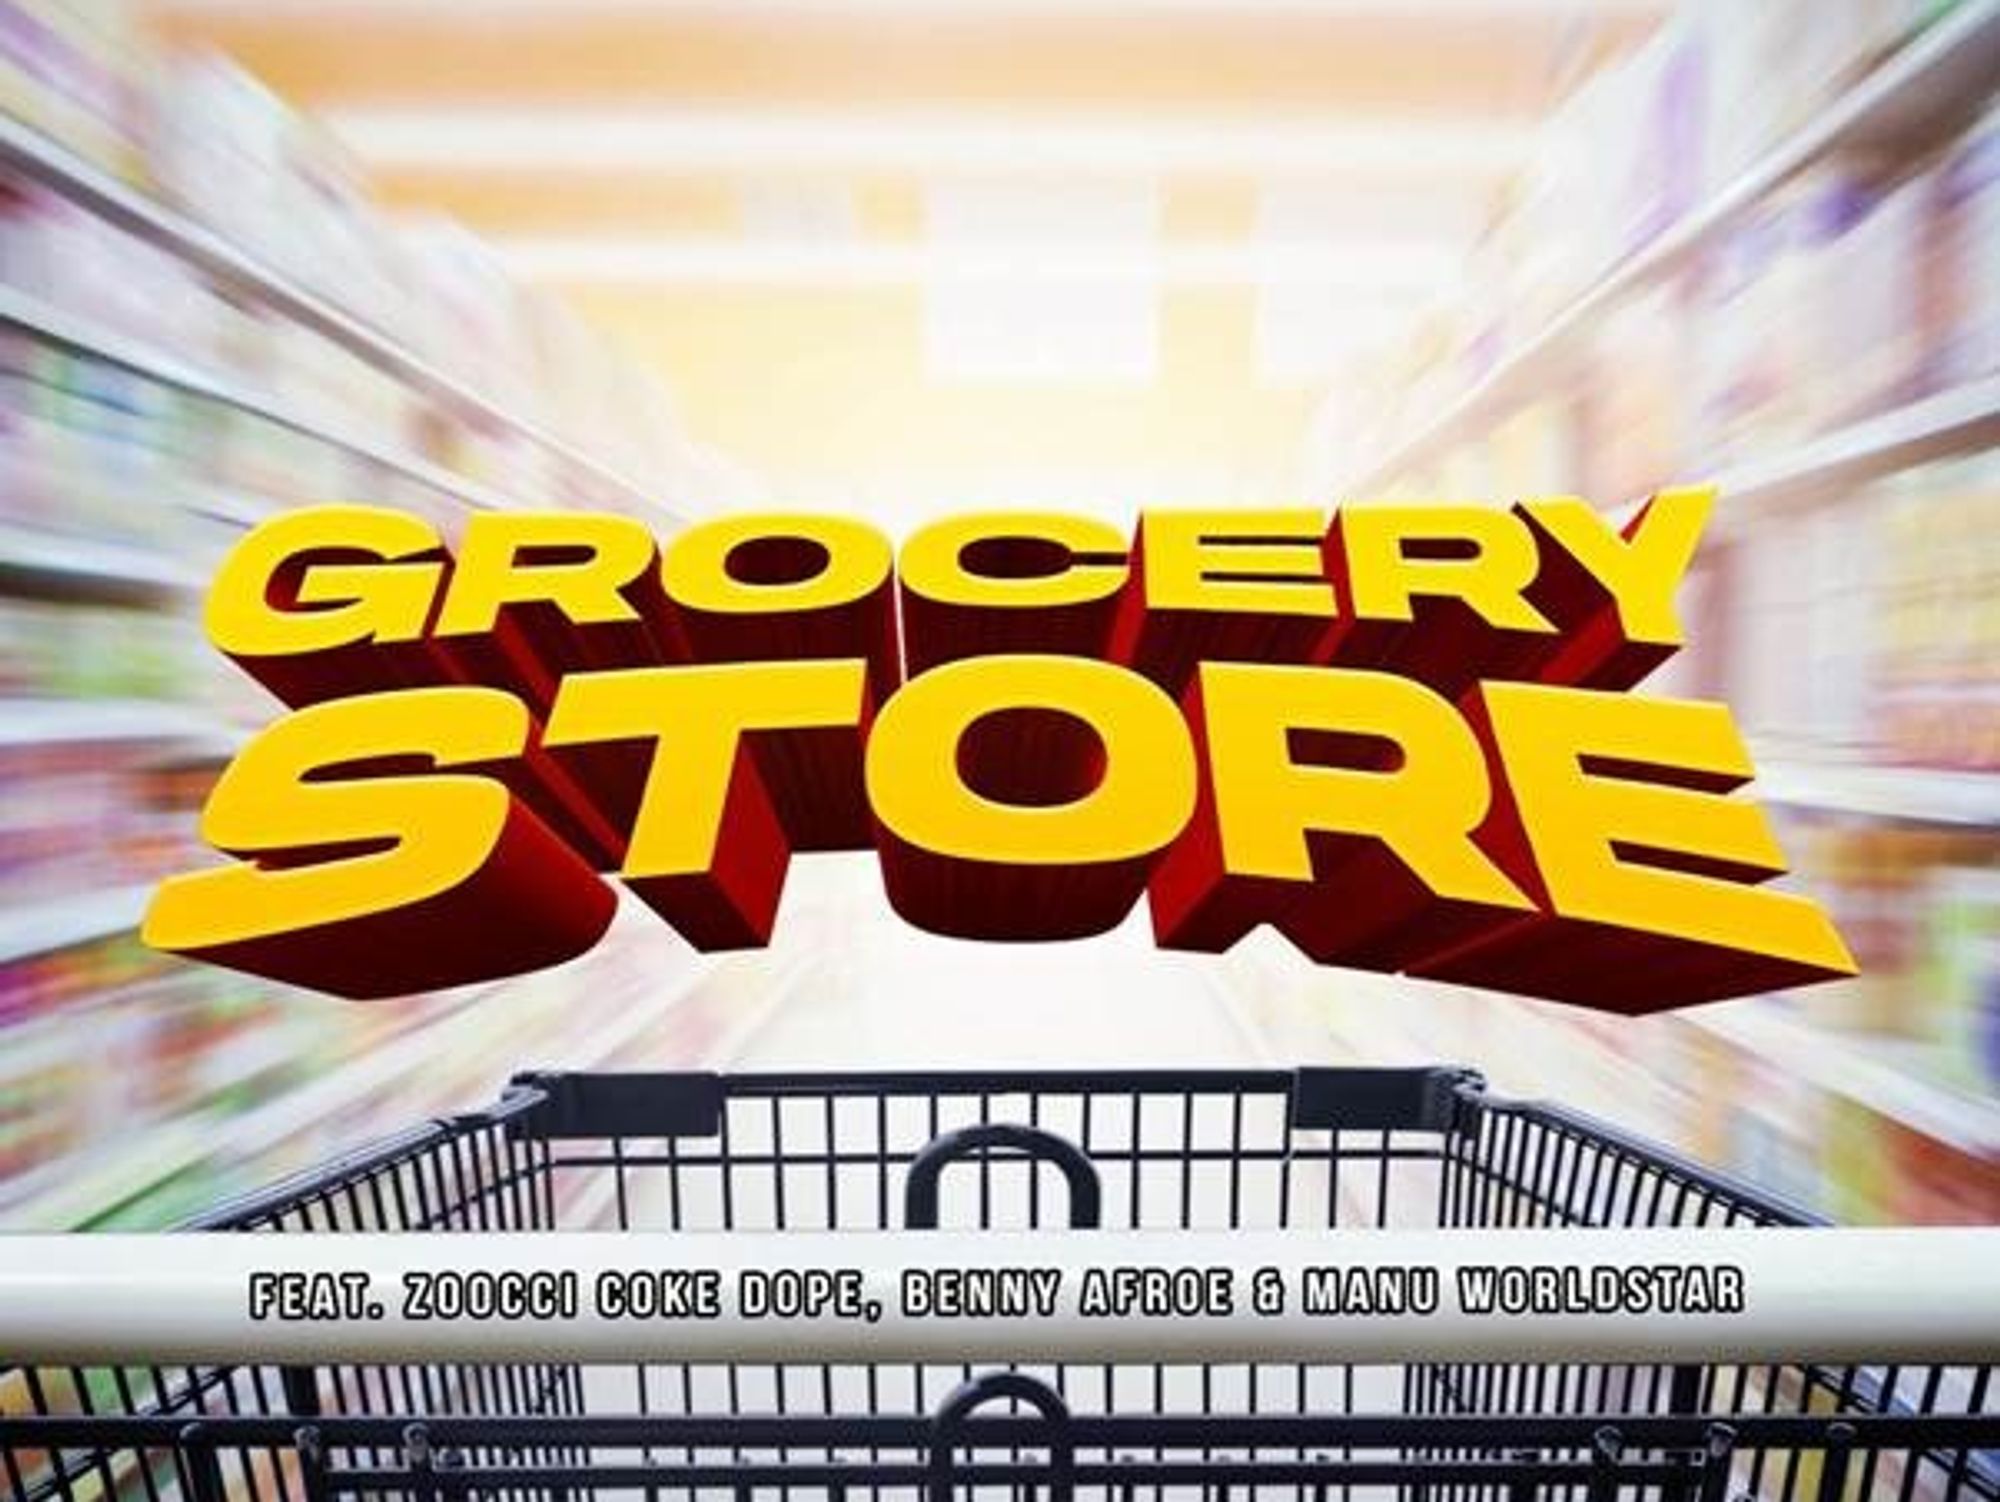 Artwork for "Grocery Store":A POV image of a shopping cart with floating text. 